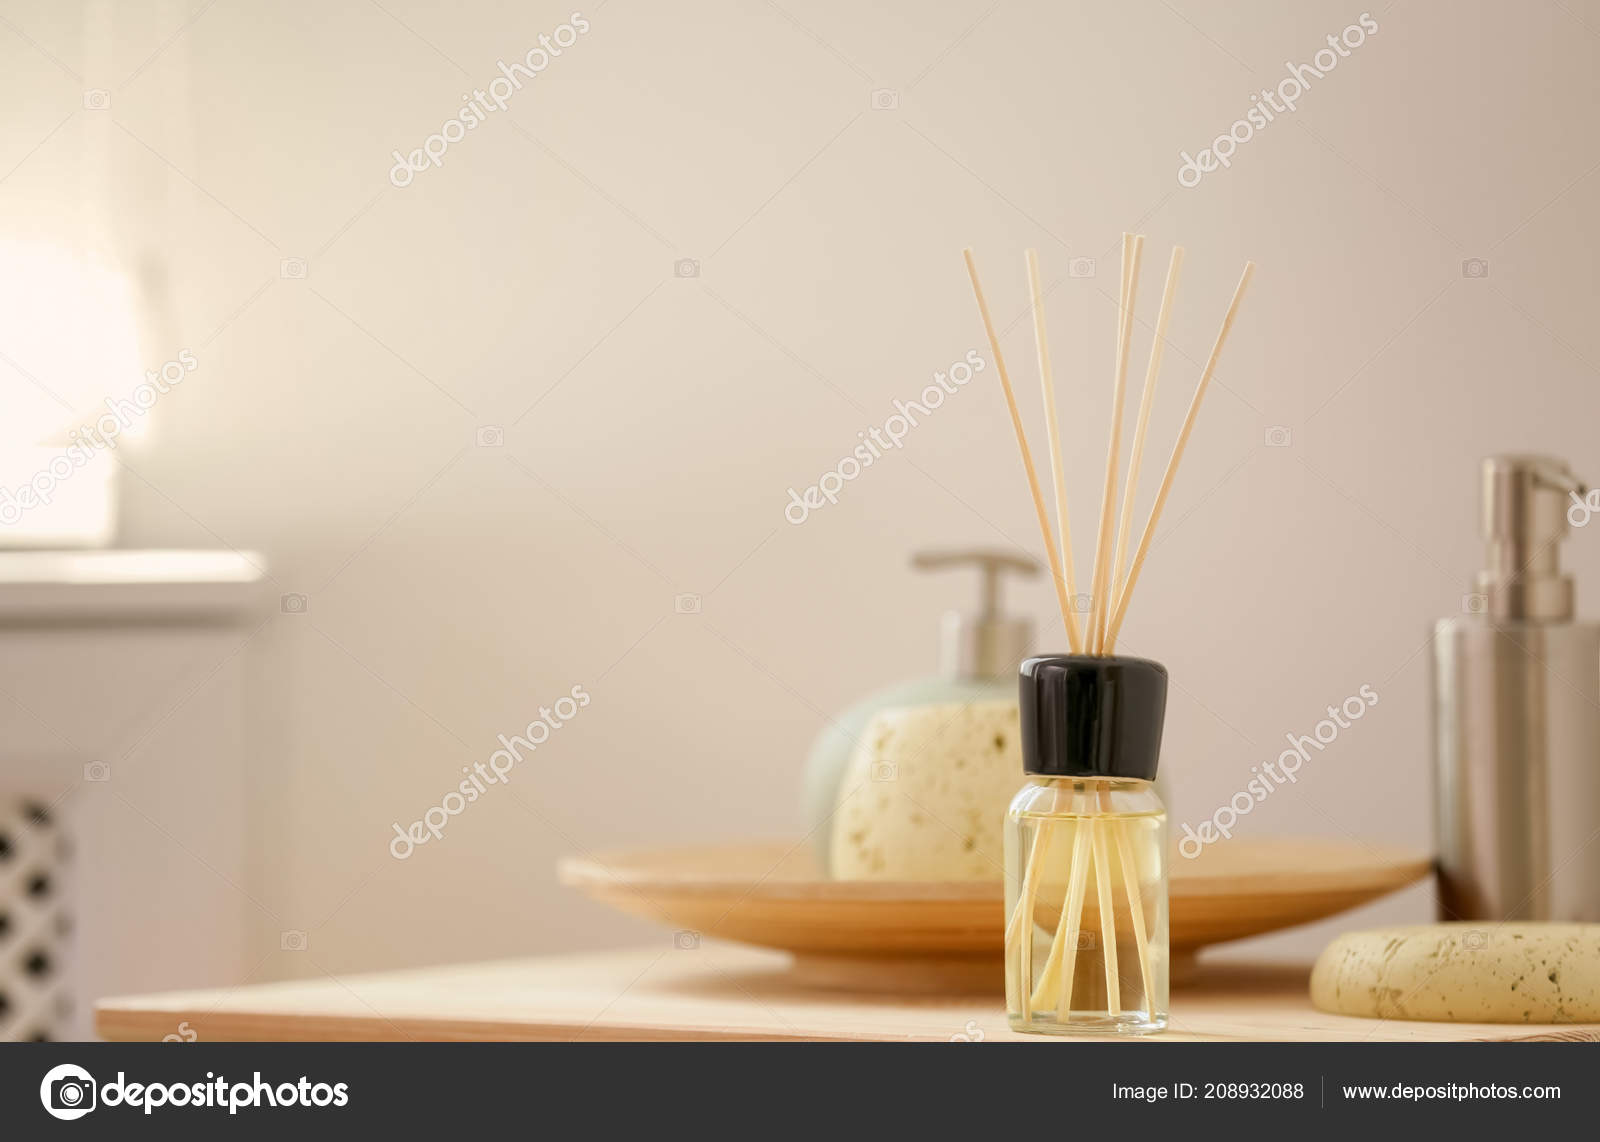 Aromatic Reed Air Freshener Toiletries Table Indoors Stock Photo